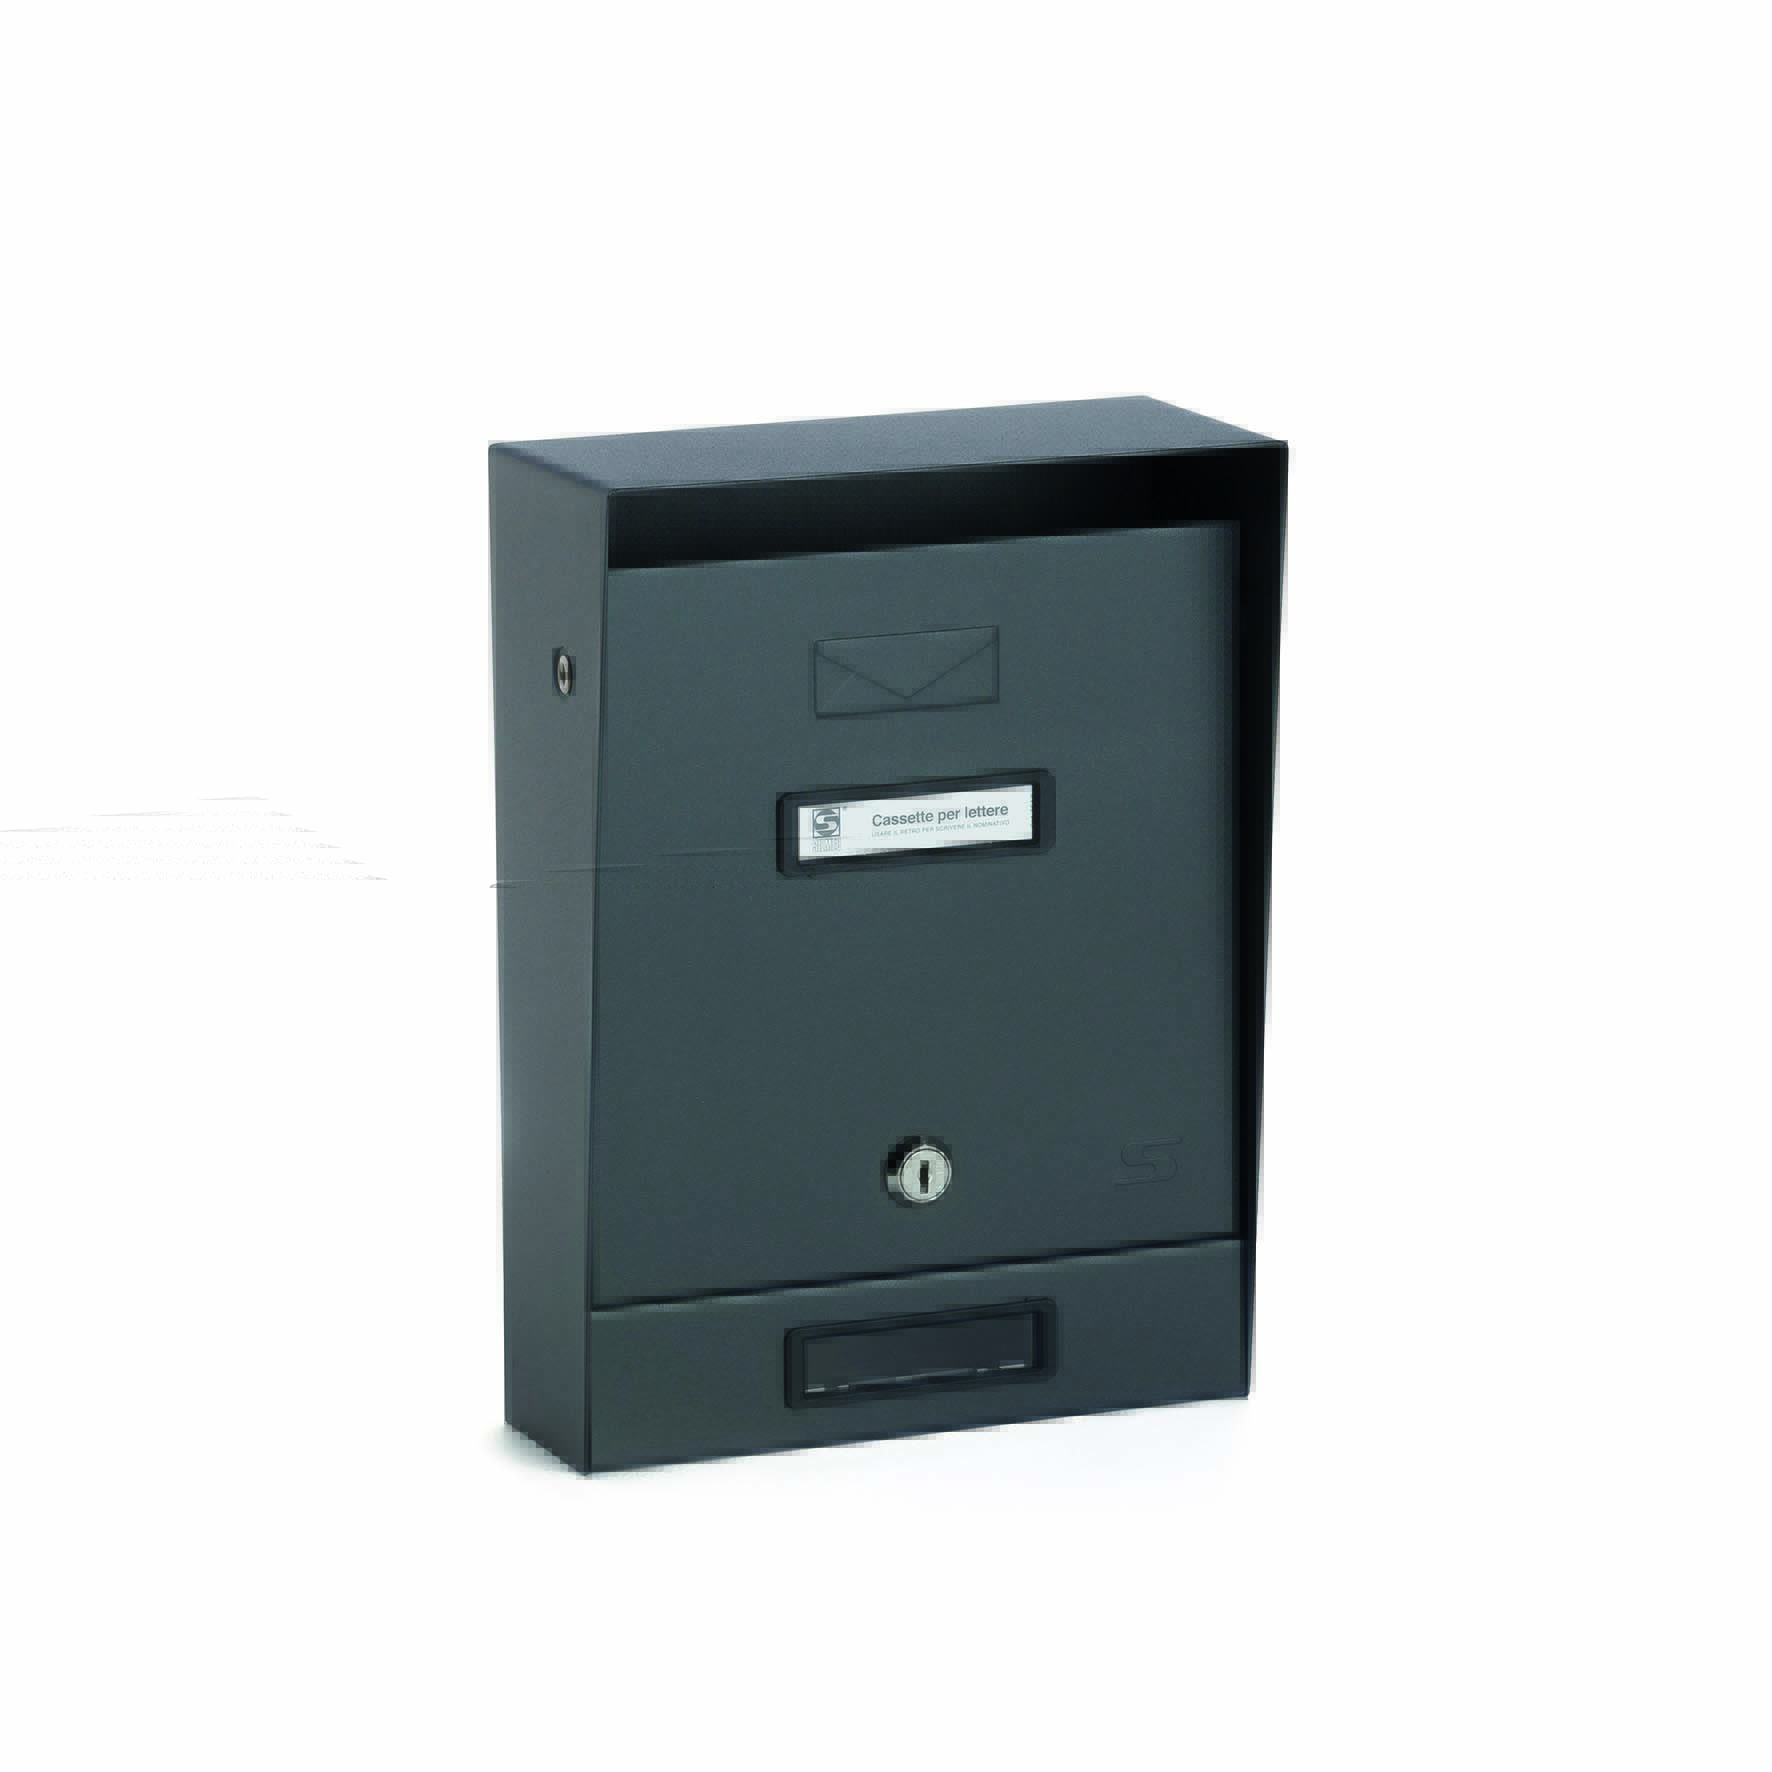 S02 letterbox with fixed weather shield